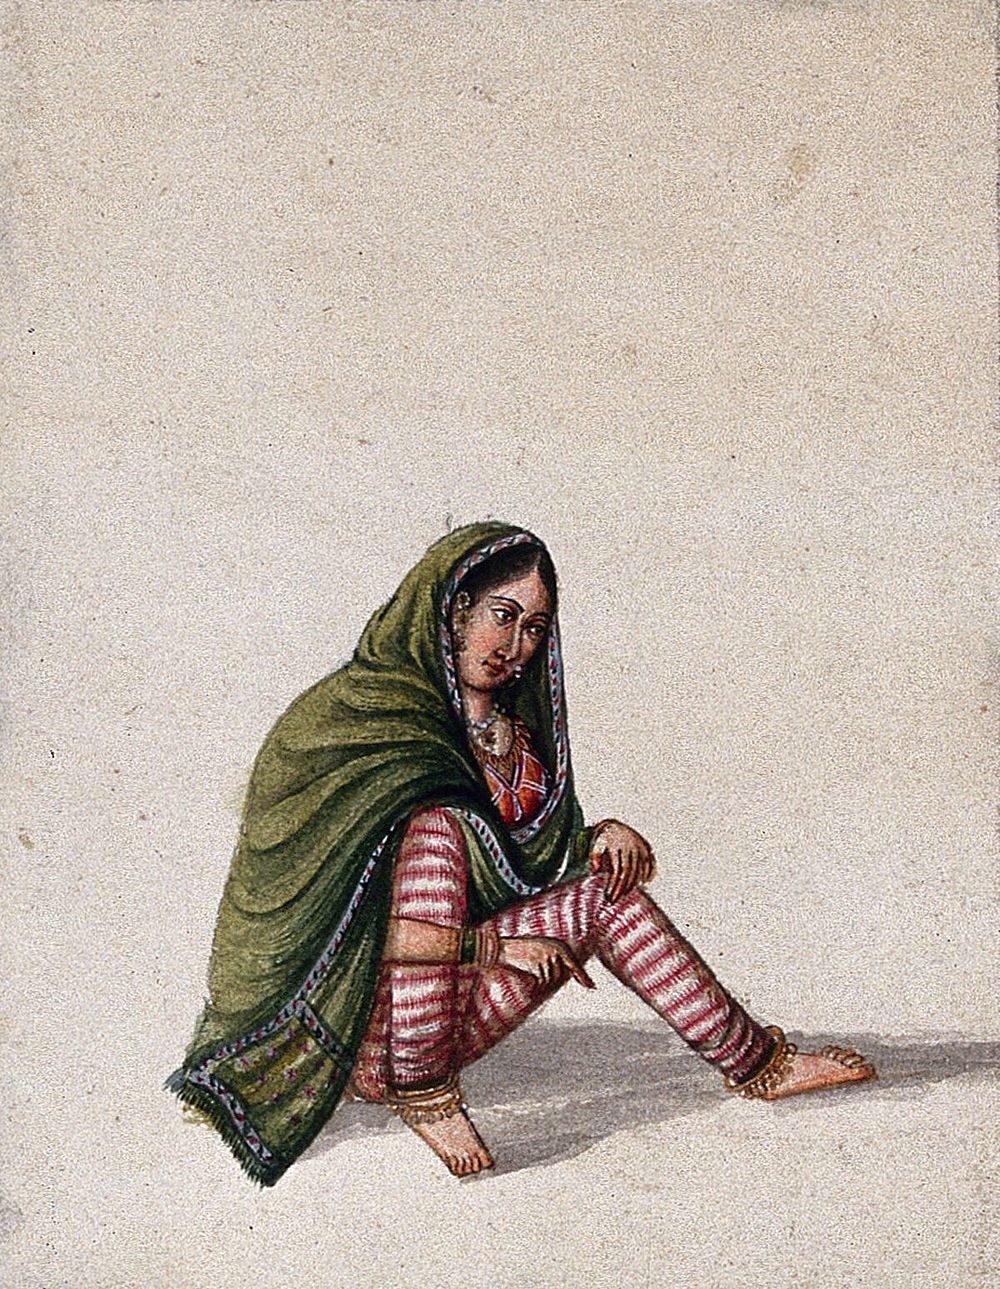 A woman in a green chunni (scarf) sitting and pointing to the ground. Gouache painting by an Indian artist.